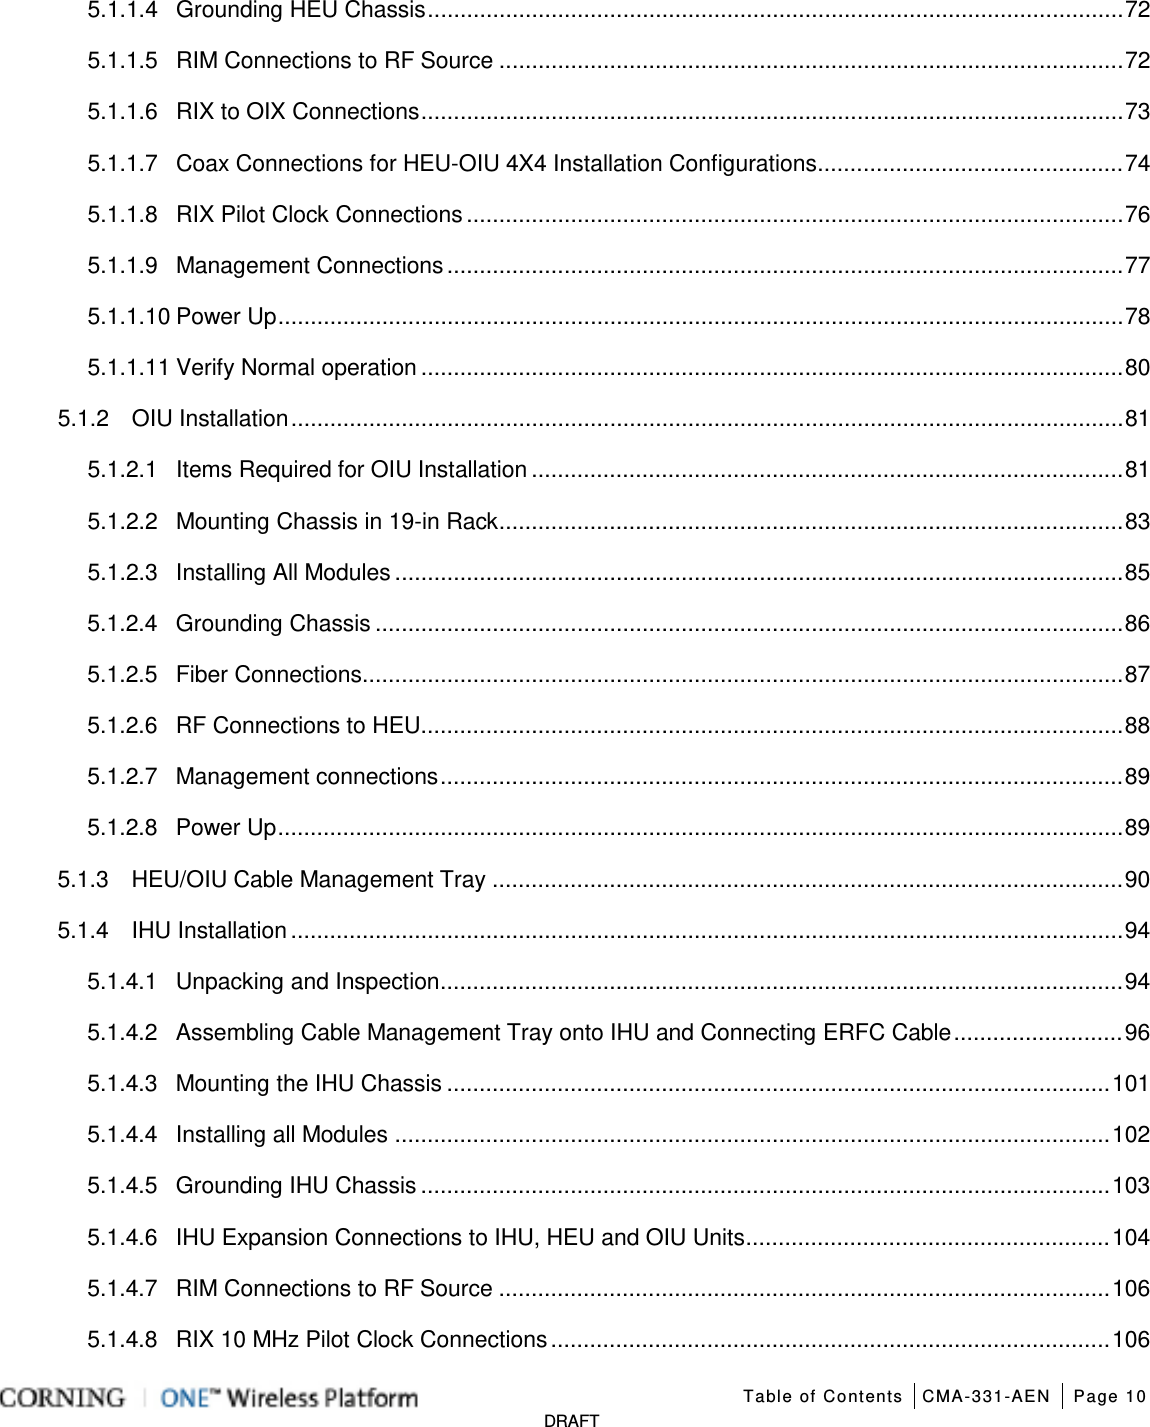   Table of Contents CMA-331-AEN Page 10   DRAFT 5.1.1.4 Grounding HEU Chassis ........................................................................................................... 72 5.1.1.5 RIM Connections to RF Source ................................................................................................ 72 5.1.1.6 RIX to OIX Connections ............................................................................................................ 73 5.1.1.7 Coax Connections for HEU-OIU 4X4 Installation Configurations ............................................... 74 5.1.1.8 RIX Pilot Clock Connections ..................................................................................................... 76 5.1.1.9 Management Connections ........................................................................................................ 77 5.1.1.10 Power Up .................................................................................................................................. 78 5.1.1.11 Verify Normal operation ............................................................................................................ 80 5.1.2 OIU Installation ................................................................................................................................ 81 5.1.2.1 Items Required for OIU Installation ........................................................................................... 81 5.1.2.2 Mounting Chassis in 19-in Rack ................................................................................................ 83 5.1.2.3 Installing All Modules ................................................................................................................ 85 5.1.2.4 Grounding Chassis ................................................................................................................... 86 5.1.2.5 Fiber Connections ..................................................................................................................... 87 5.1.2.6 RF Connections to HEU ............................................................................................................ 88 5.1.2.7 Management connections ......................................................................................................... 89 5.1.2.8 Power Up .................................................................................................................................. 89 5.1.3 HEU/OIU Cable Management Tray ................................................................................................. 90 5.1.4 IHU Installation ................................................................................................................................ 94 5.1.4.1 Unpacking and Inspection ......................................................................................................... 94 5.1.4.2 Assembling Cable Management Tray onto IHU and Connecting ERFC Cable .......................... 96 5.1.4.3 Mounting the IHU Chassis ...................................................................................................... 101 5.1.4.4 Installing all Modules .............................................................................................................. 102 5.1.4.5 Grounding IHU Chassis .......................................................................................................... 103 5.1.4.6 IHU Expansion Connections to IHU, HEU and OIU Units ........................................................ 104 5.1.4.7 RIM Connections to RF Source .............................................................................................. 106 5.1.4.8 RIX 10 MHz Pilot Clock Connections ...................................................................................... 106 